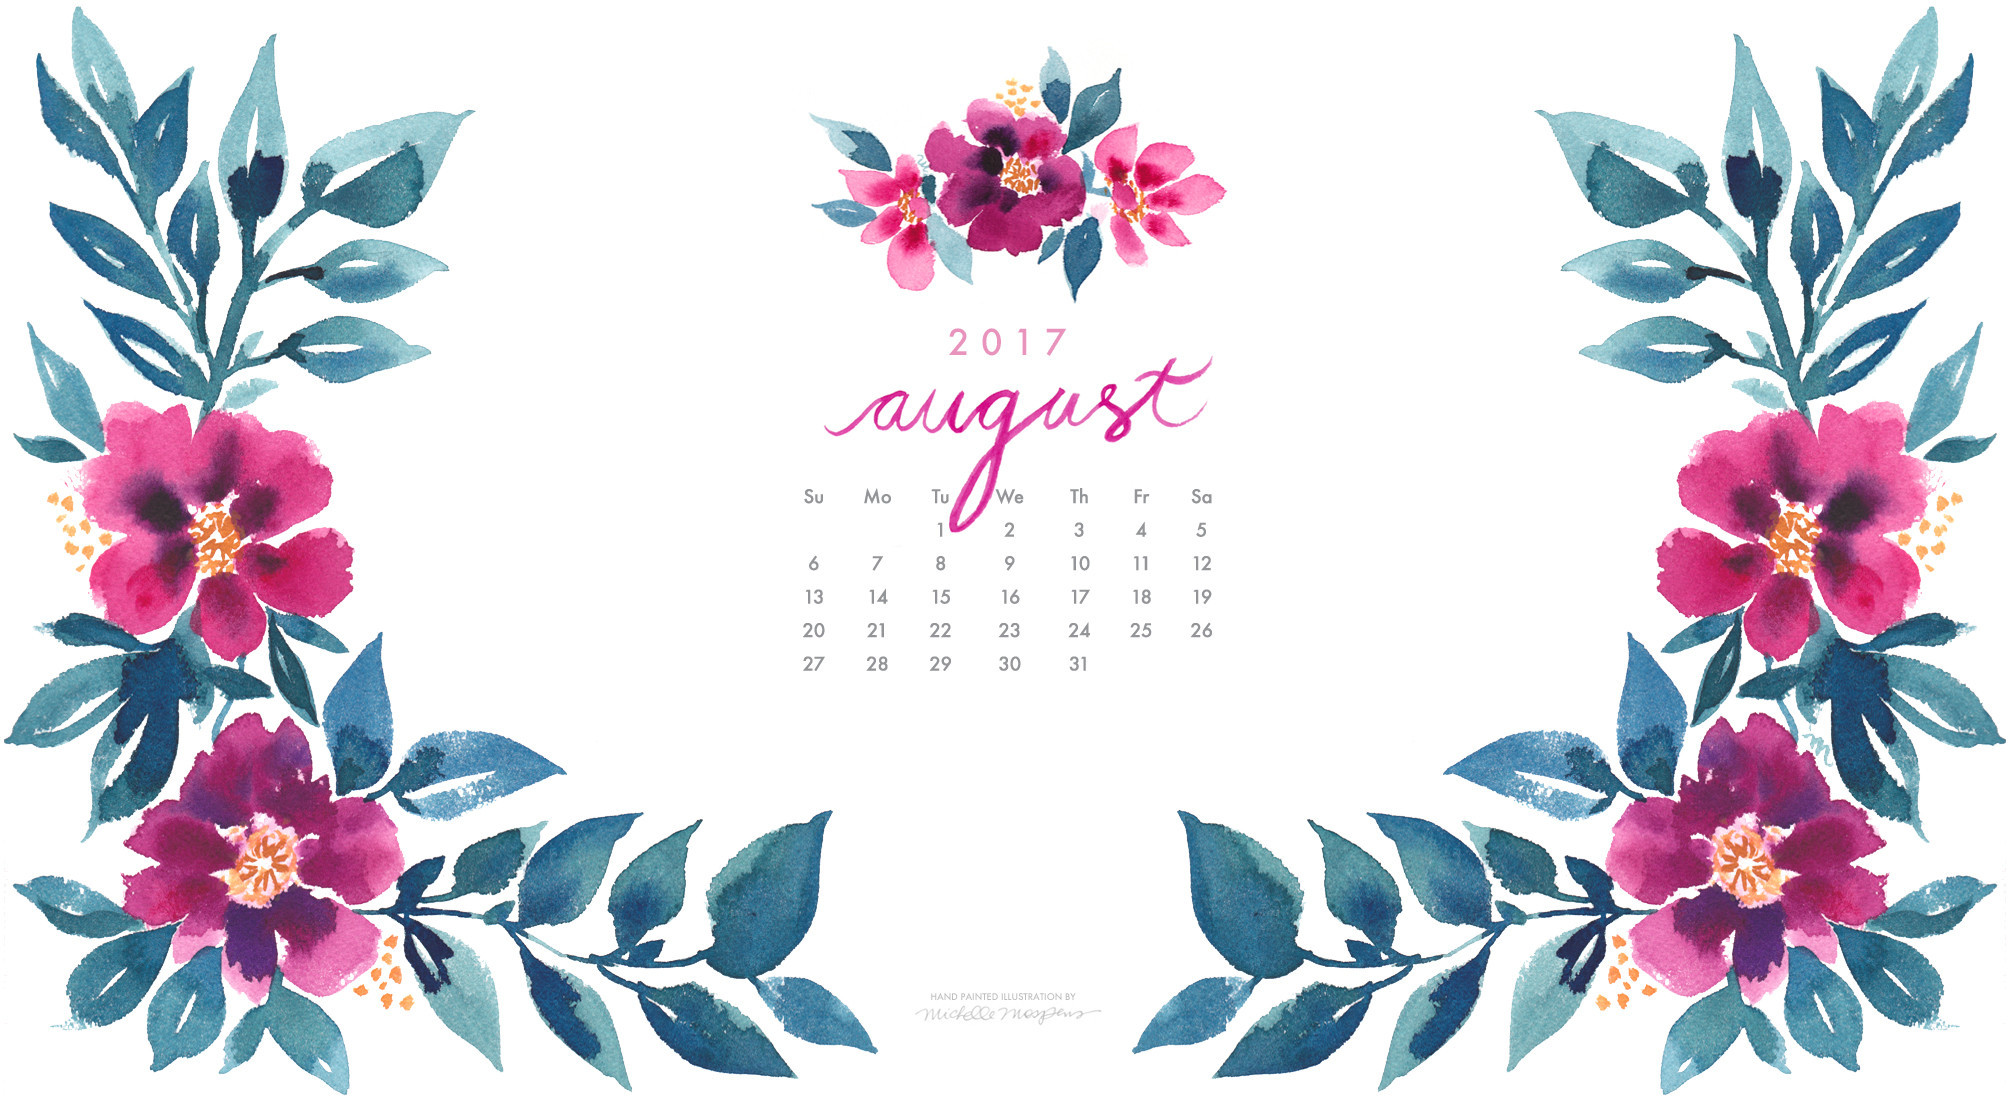 2016x1100  Pretty posy watercolor August 2017 calendar wallpaper for your  computer. 100% original art by